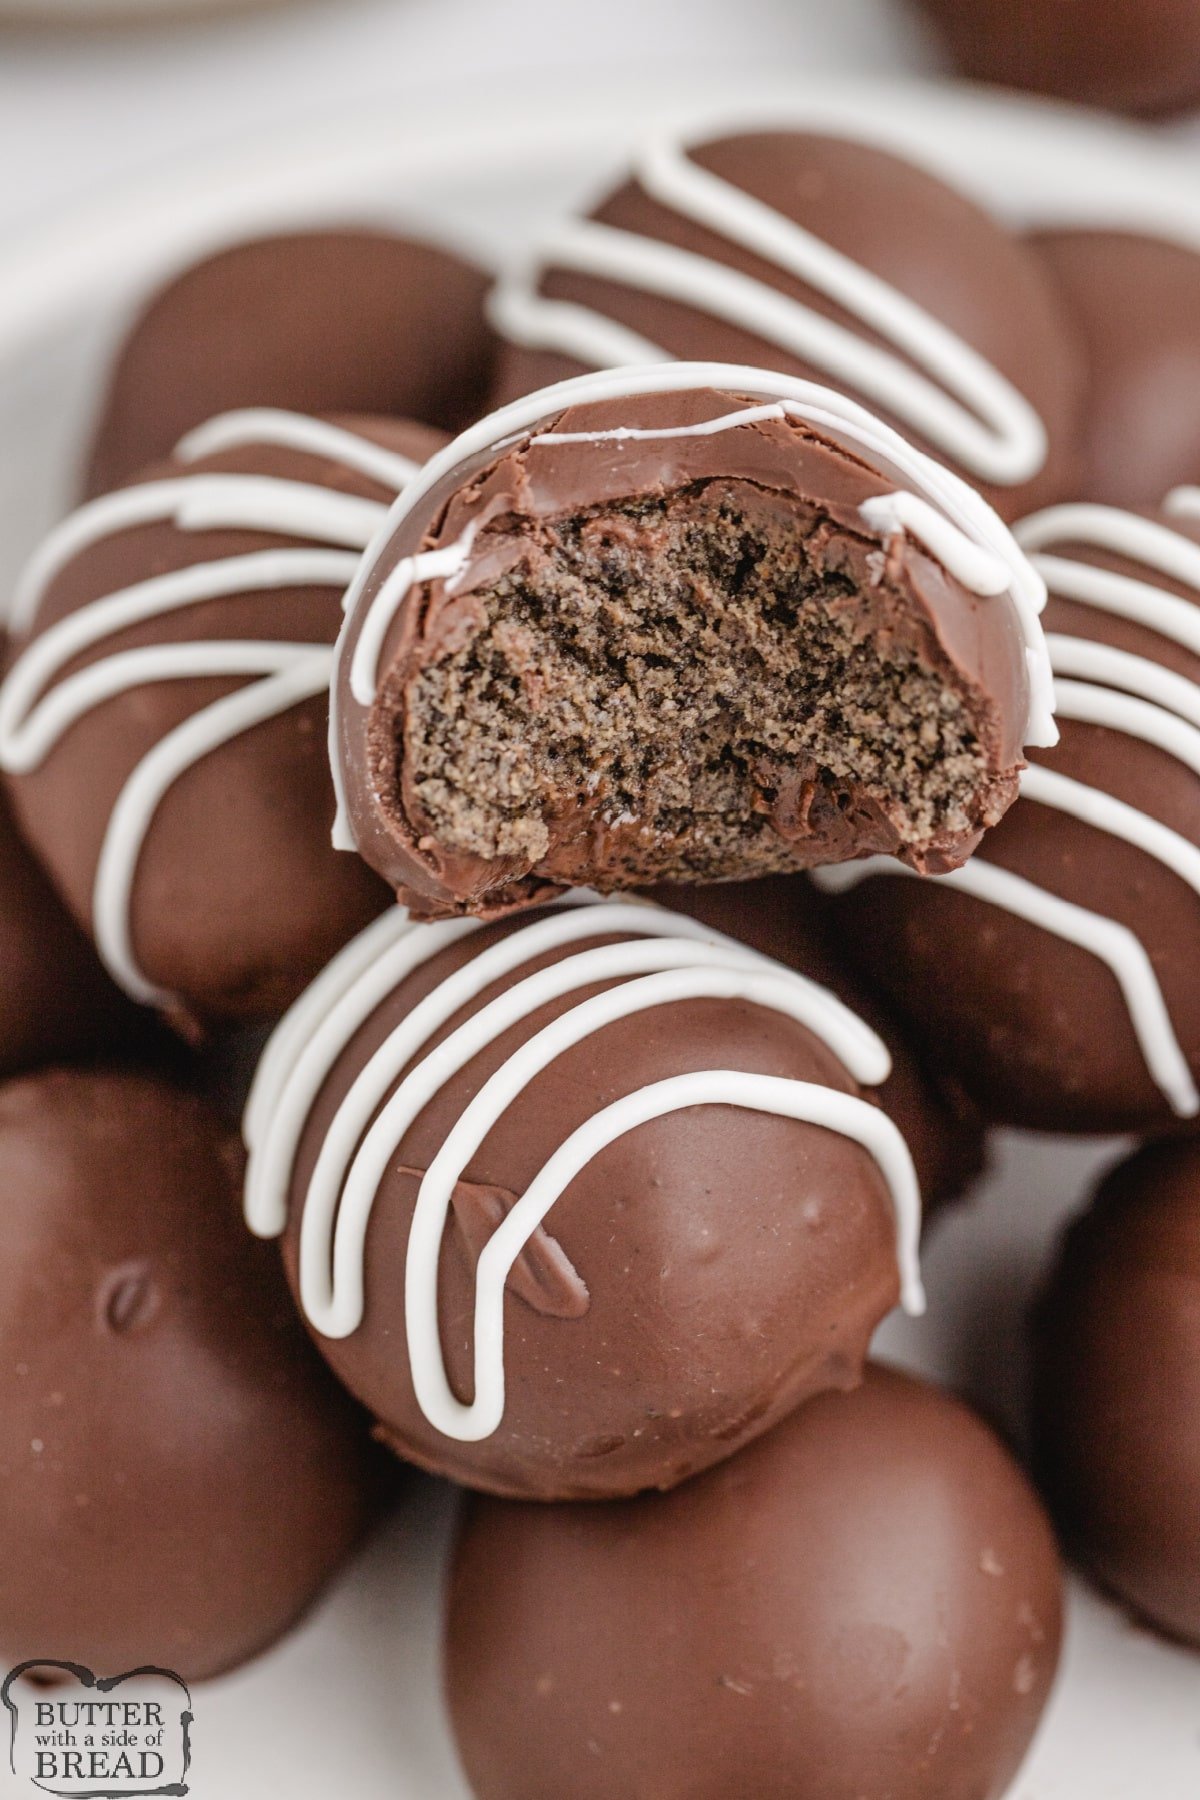 Peanut Butter Oreo Balls made with just 4 ingredients for the perfect no bake dessert! Delicious, bite-sized treats that are so easy to make!